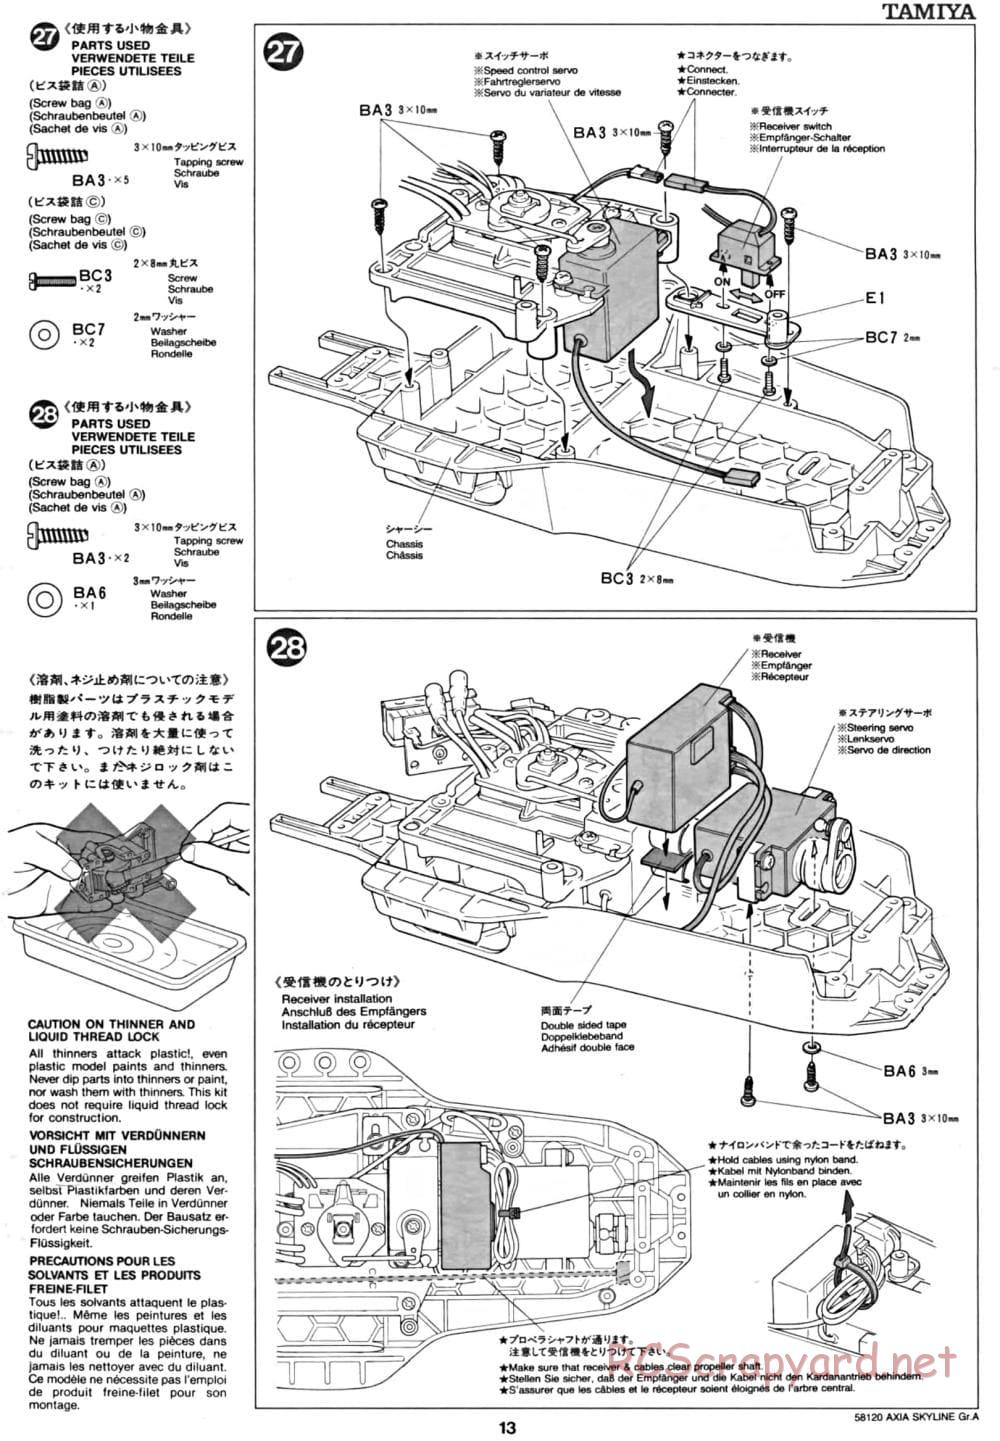 Tamiya - Axia Skyline GT-R Gr.A - TA-01 Chassis - Manual - Page 13